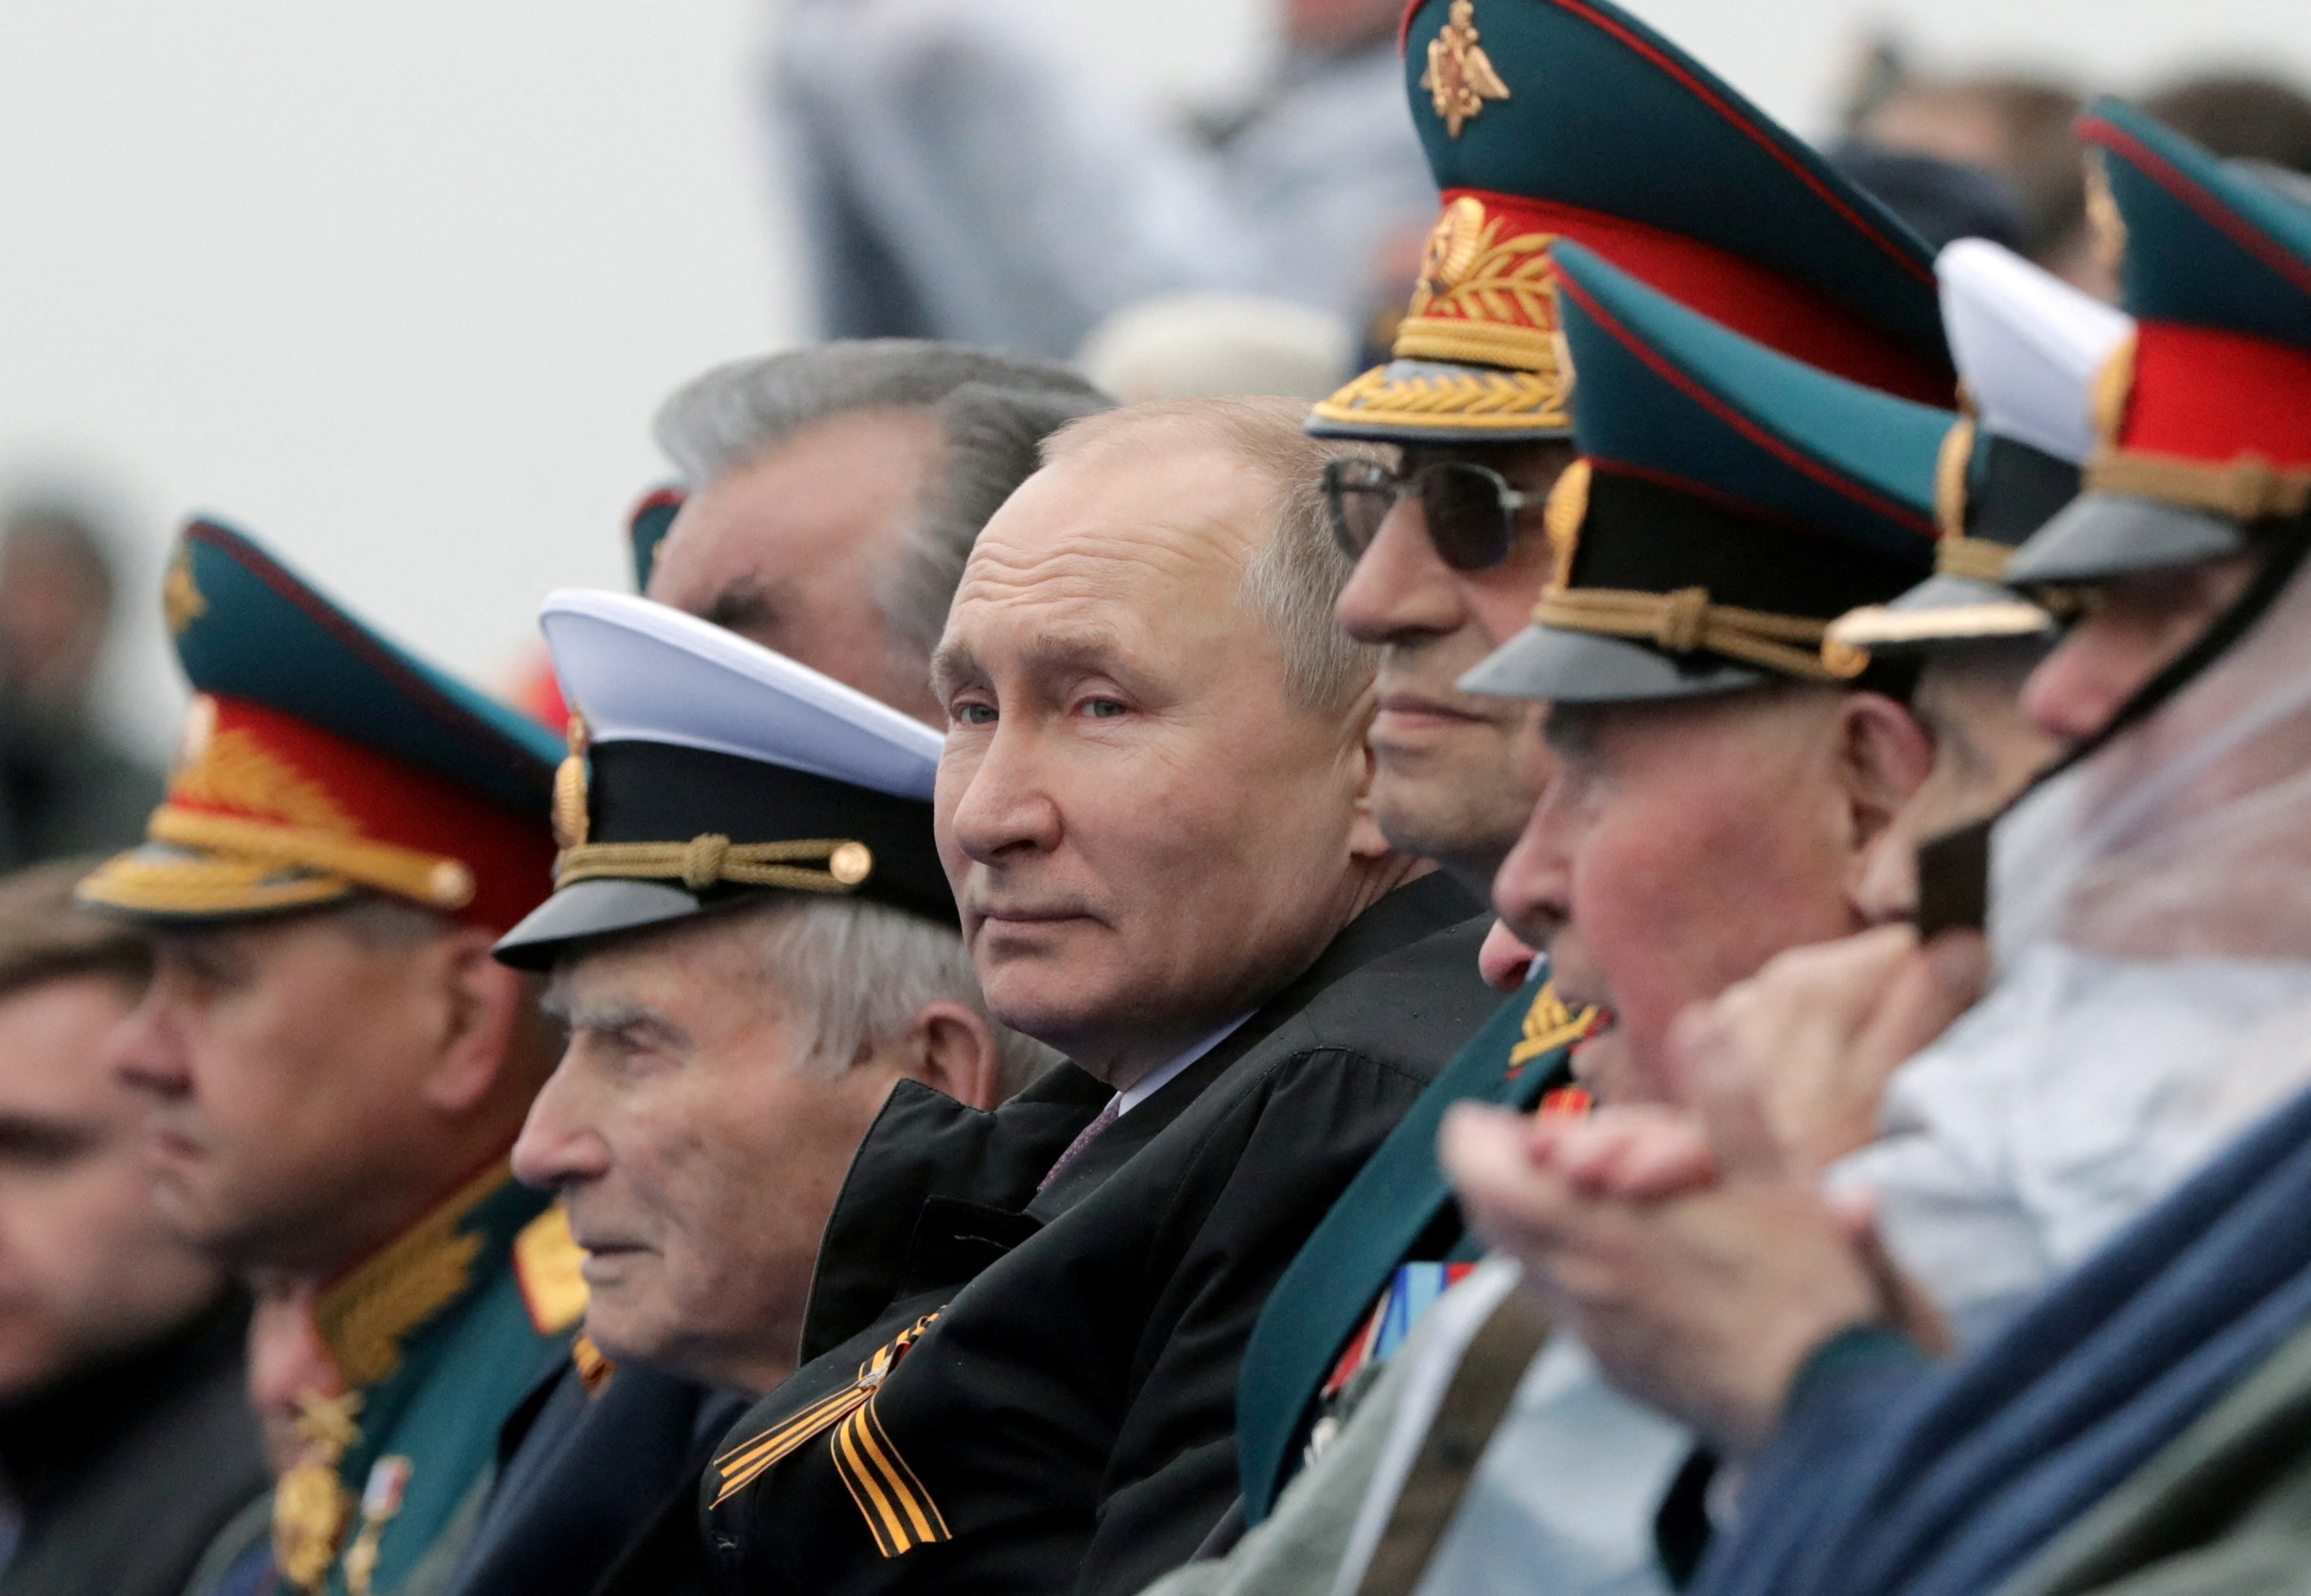 The head of the Kremlin surrounded by his military leadership (Sputnik/file)